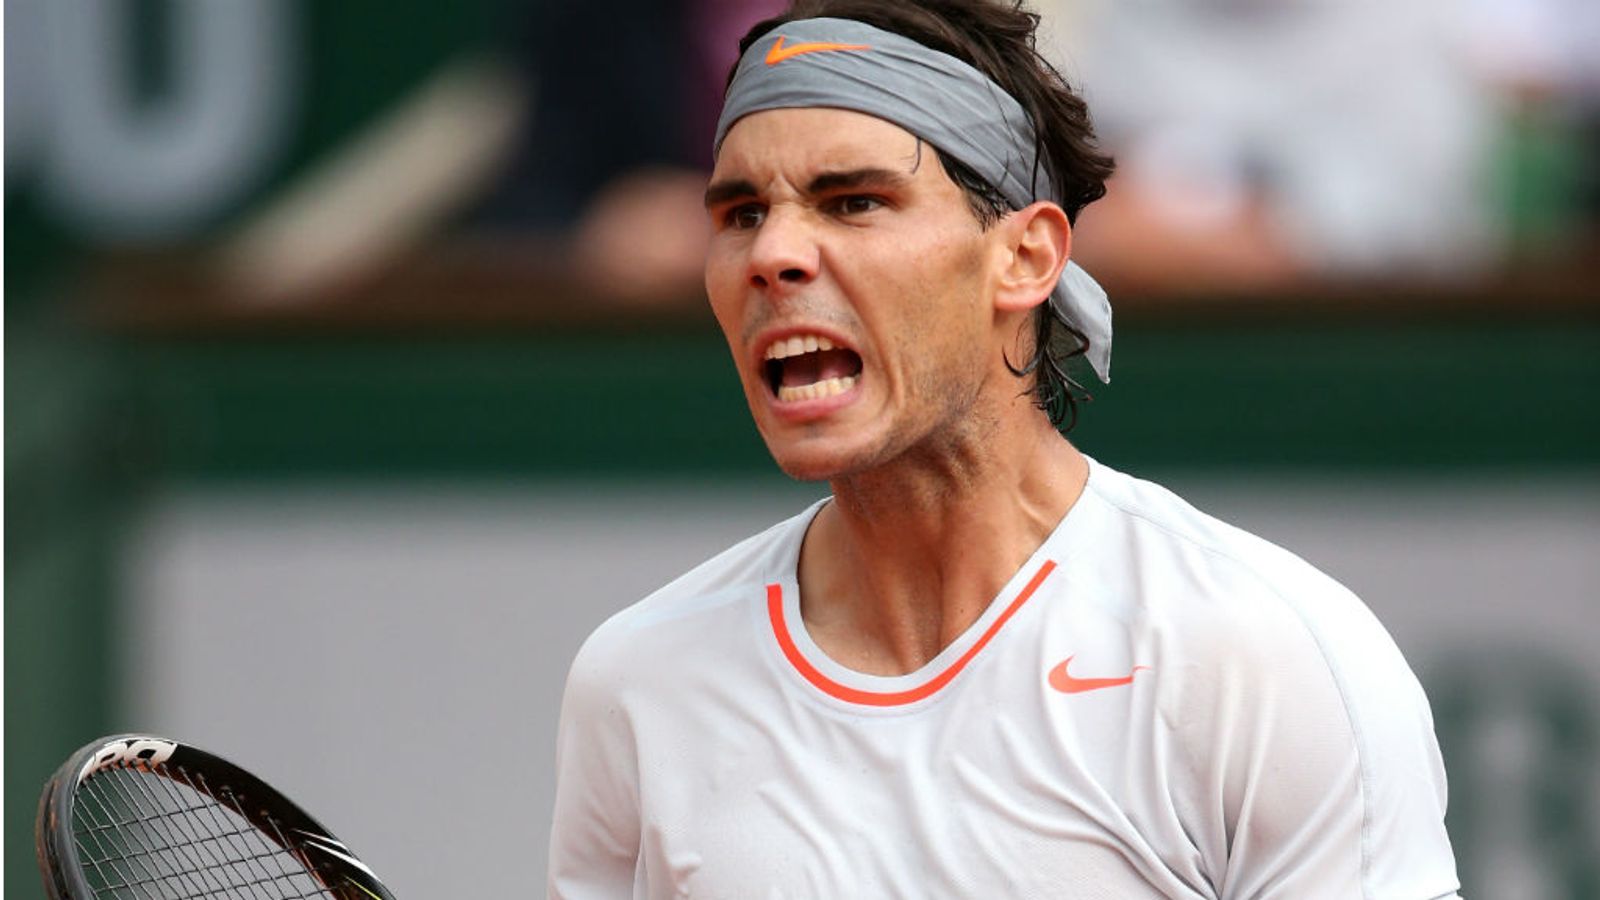 French Open Rafael Nadal through after straightsets win against Fabio